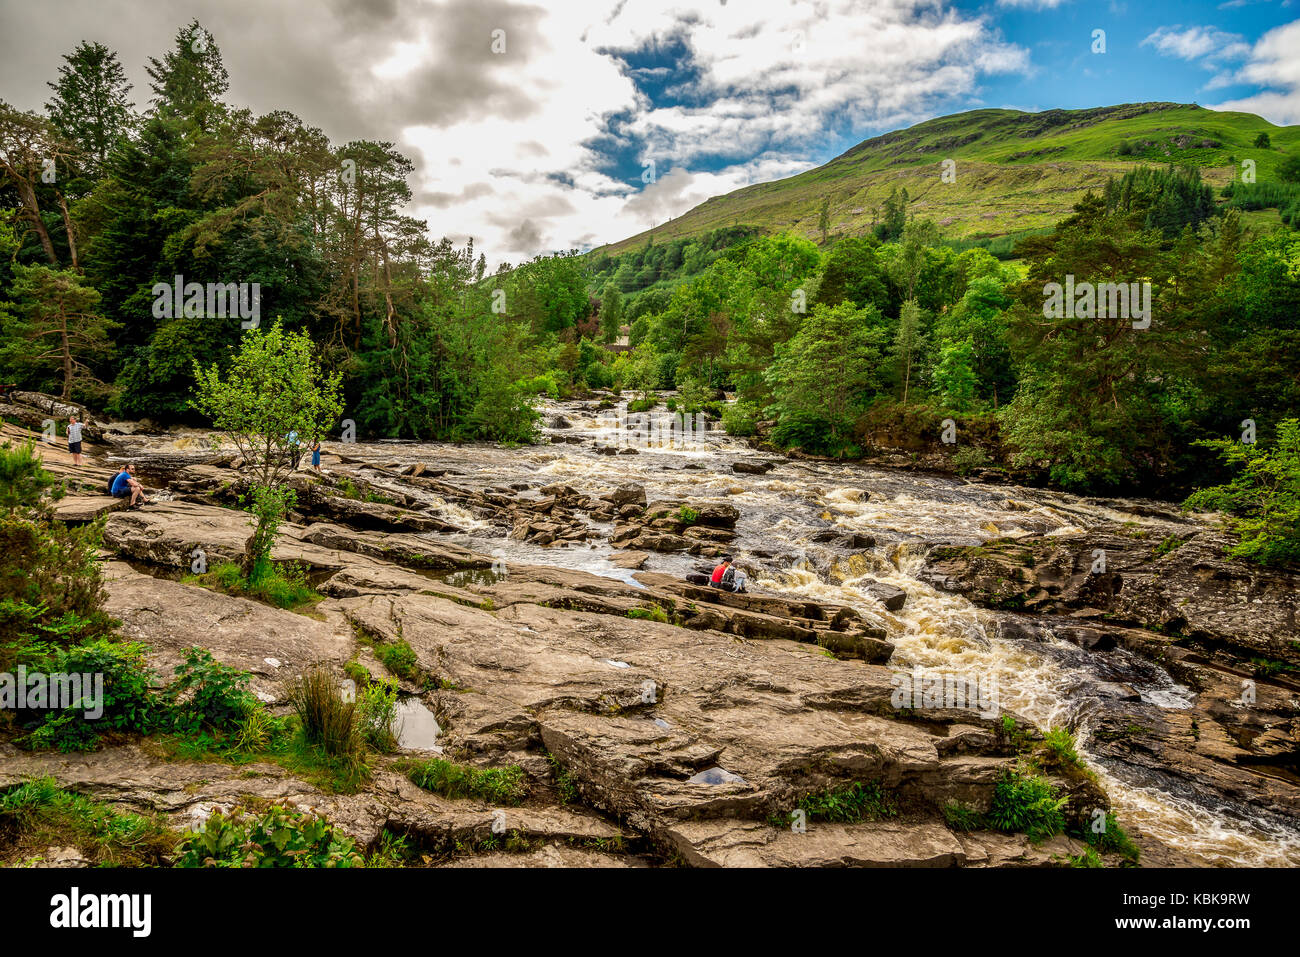 A spectacular view to Falls of Dochart from the bridge in a town of Killin, central Scotland Stock Photo